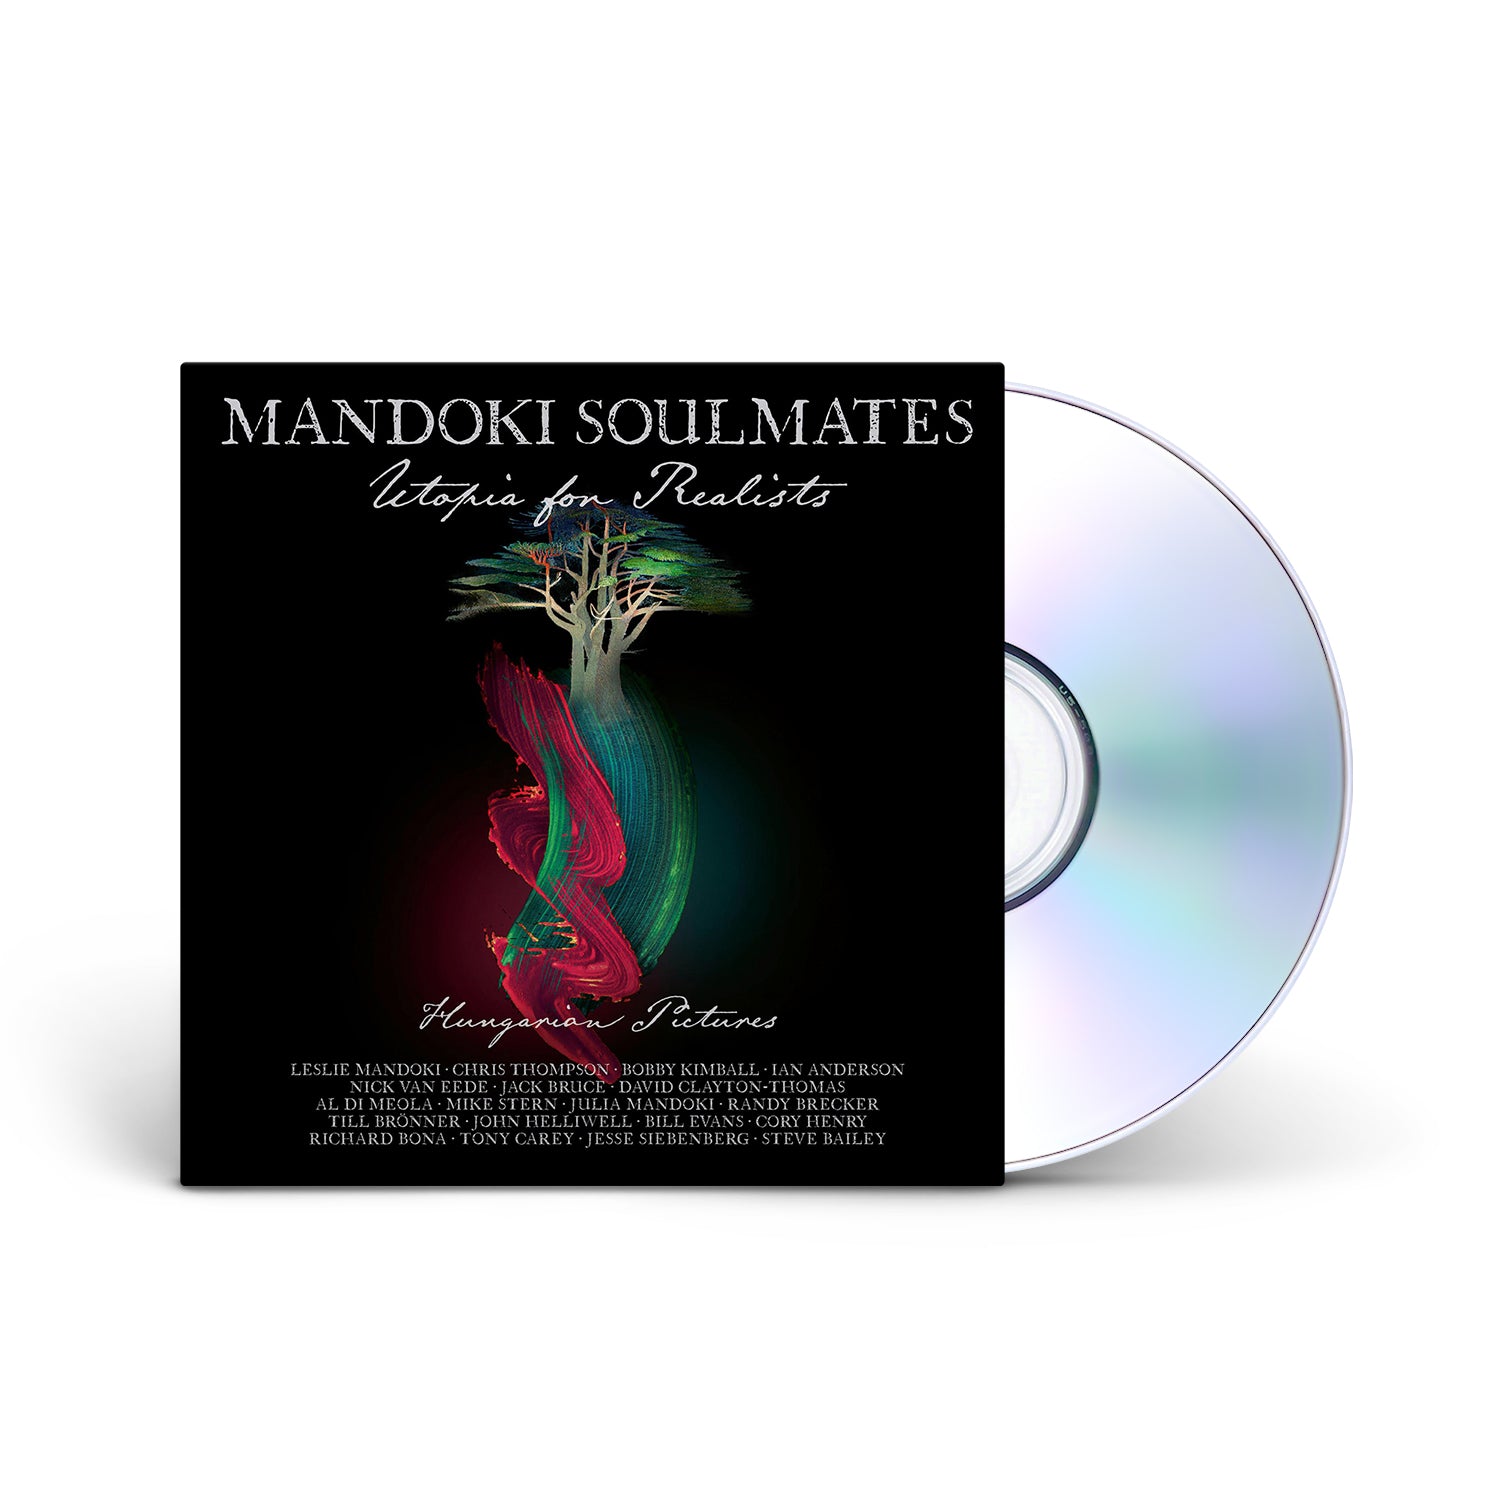 MANDOKI SOULMATES - Utopia For Realists: Hungarian Pictures - CD